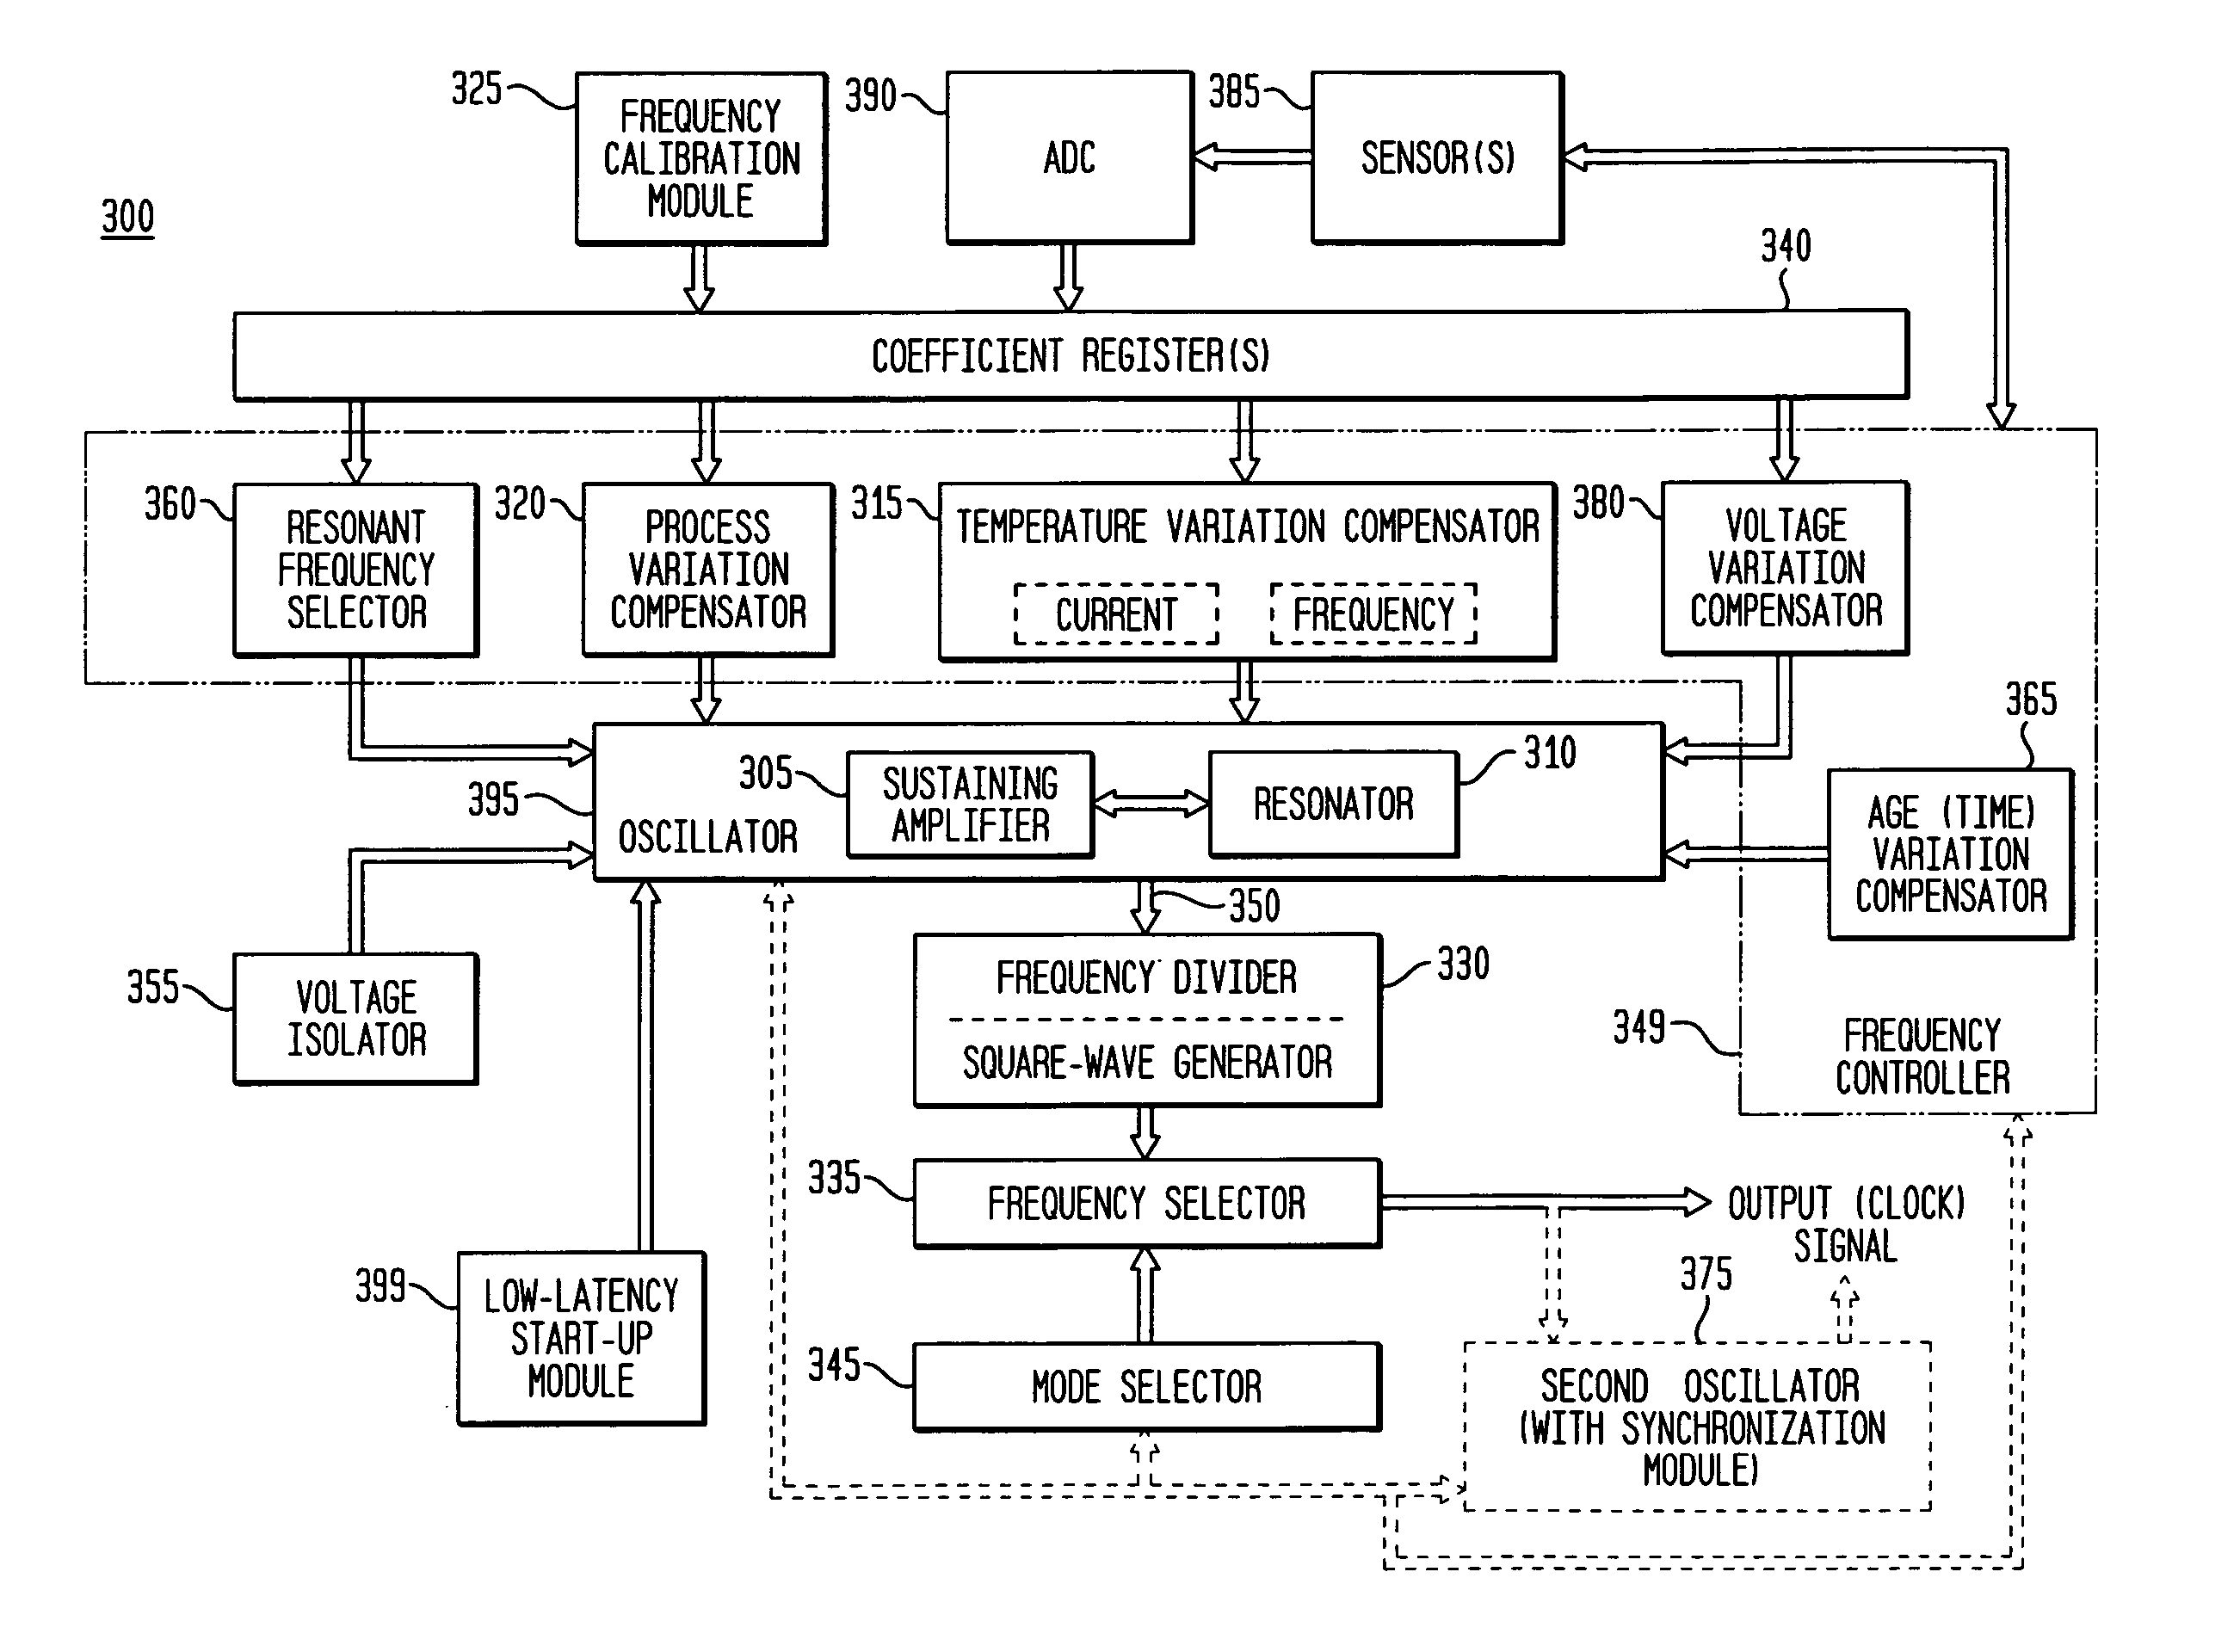 Multi-terminal harmonic oscillator integrated circuit with frequency calibration and frequency configuration